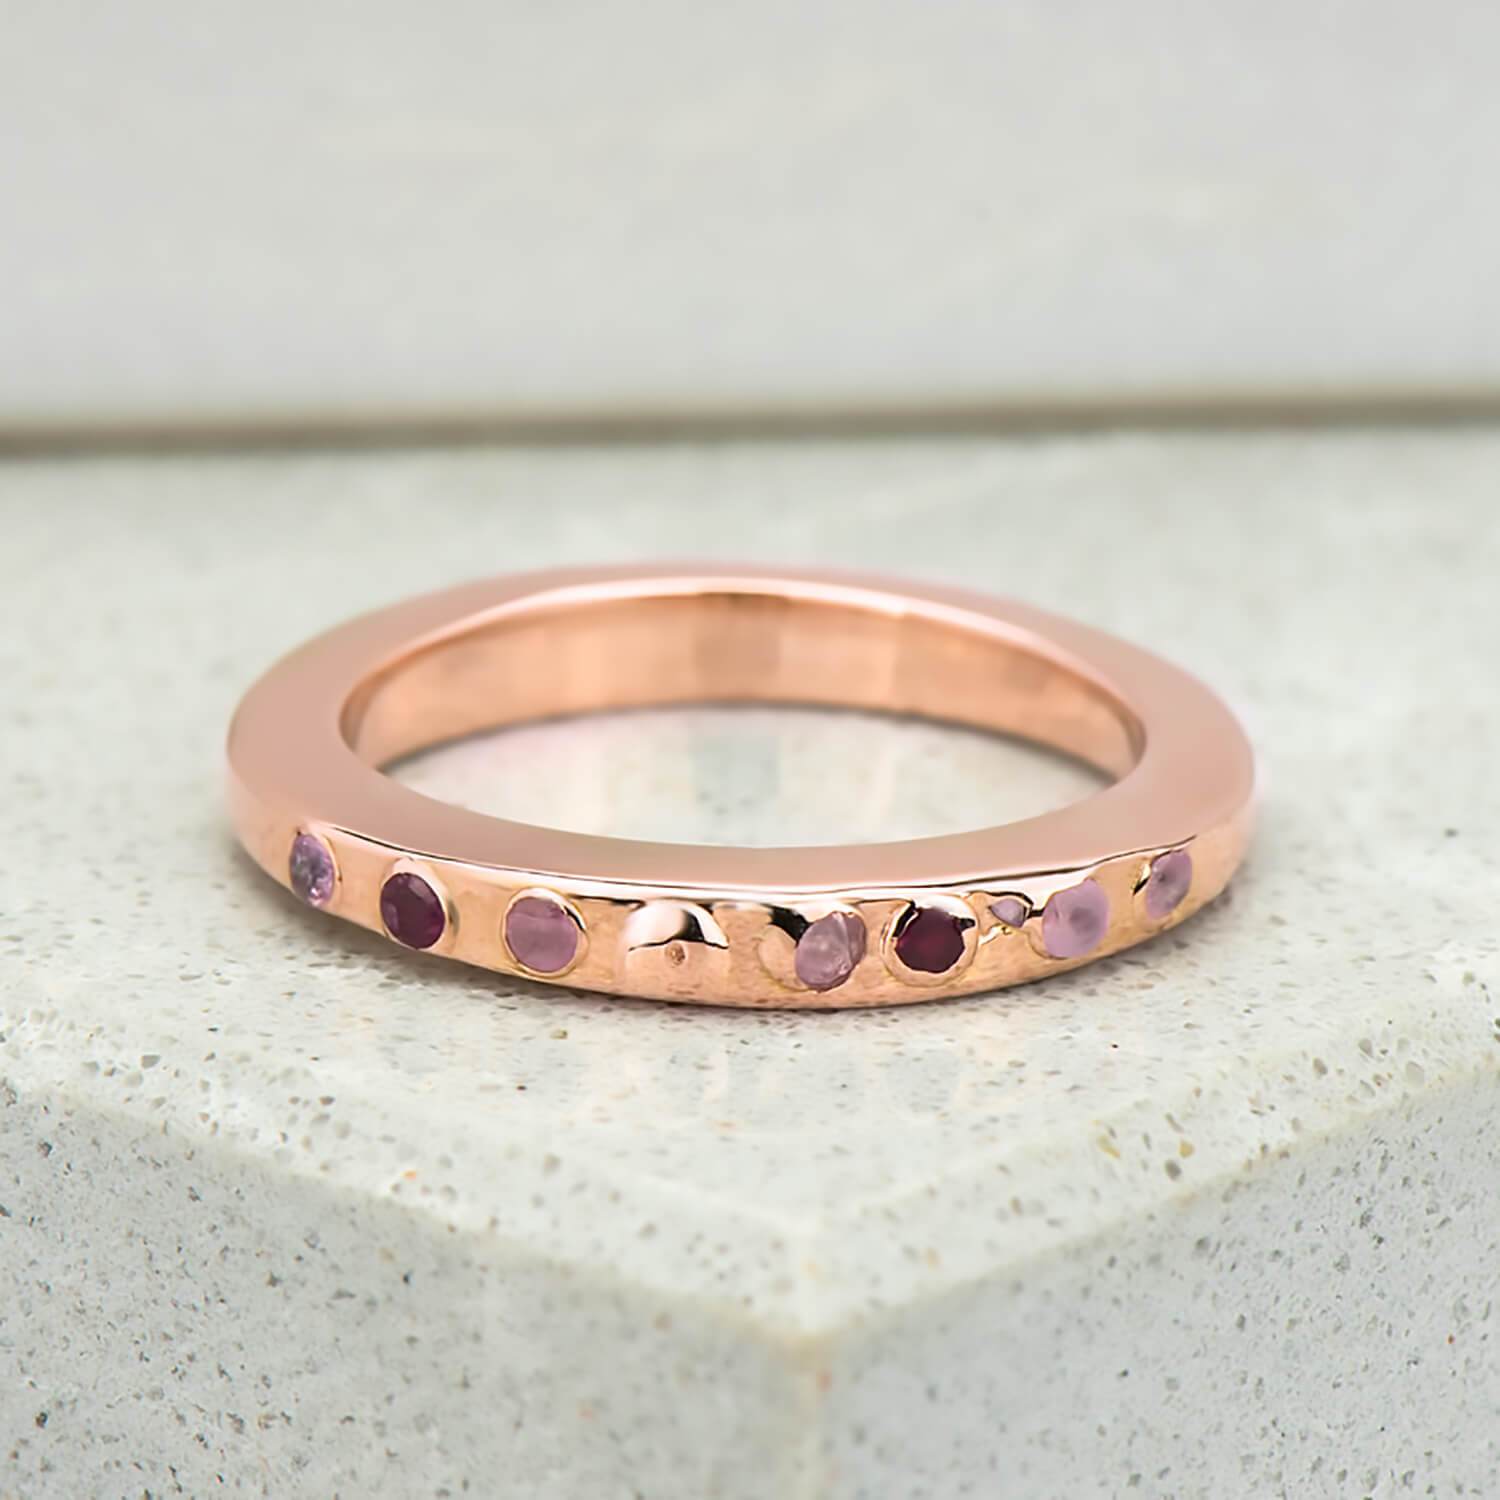 Recycled rose gold promise ring with eight natural pink sapphires in which have been set in cast. the band is approximately 3mm in width and has been finished to a mirror polish